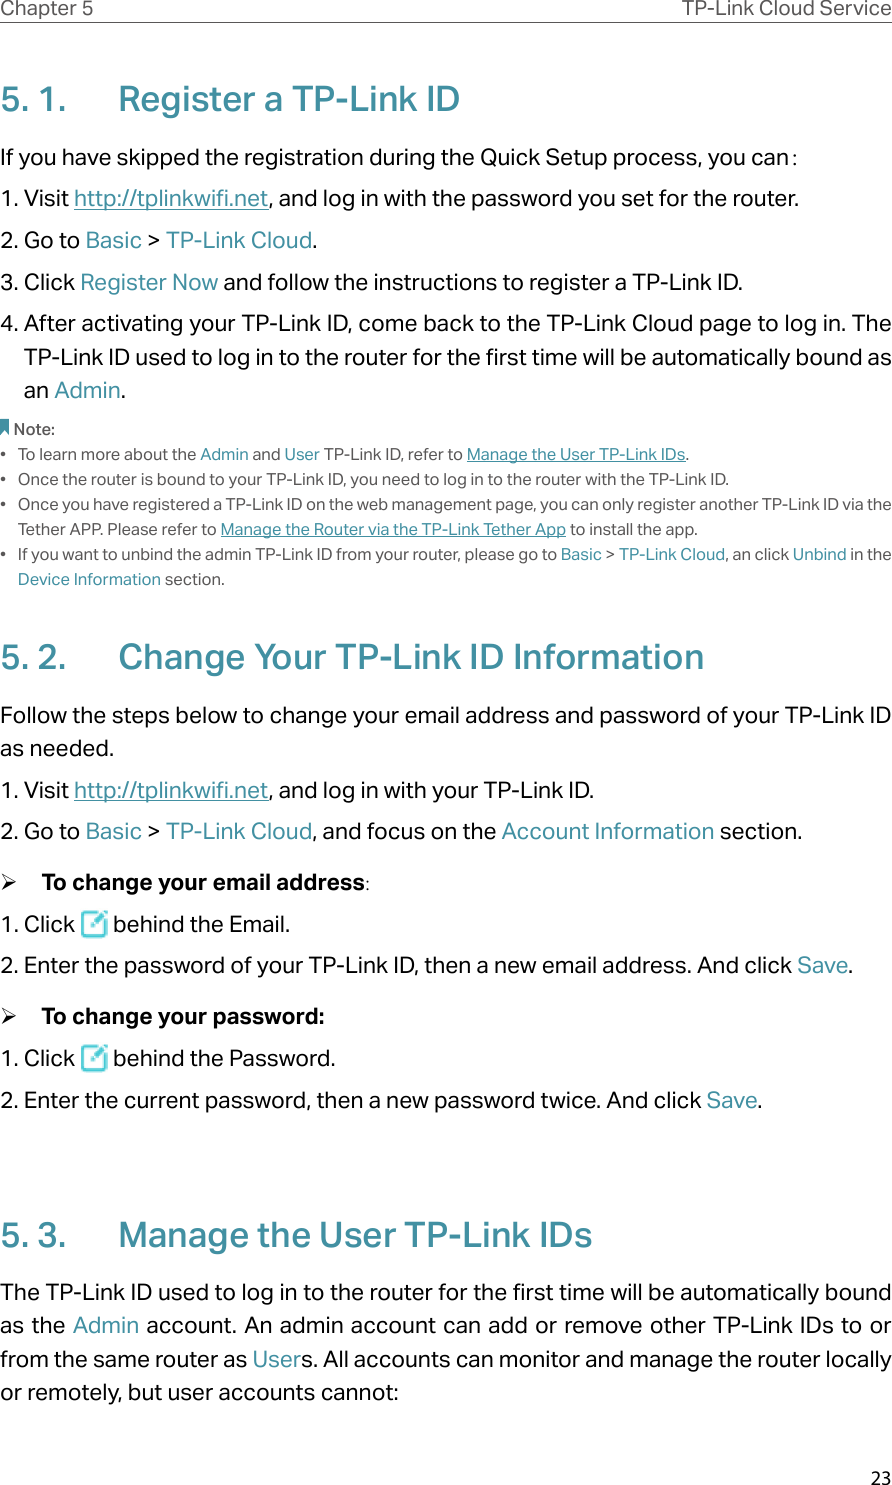 23Chapter 5 TP-Link Cloud Service5. 1.  Register a TP-Link IDIf you have skipped the registration during the Quick Setup process, you can：1. Visit http://tplinkwifi.net, and log in with the password you set for the router.2. Go to Basic &gt; TP-Link Cloud.3. Click Register Now and follow the instructions to register a TP-Link ID.4. After activating your TP-Link ID, come back to the TP-Link Cloud page to log in. The TP-Link ID used to log in to the router for the first time will be automatically bound as an Admin. Note:•  To learn more about the Admin and User TP-Link ID, refer to Manage the User TP-Link IDs.•  Once the router is bound to your TP-Link ID, you need to log in to the router with the TP-Link ID. •  Once you have registered a TP-Link ID on the web management page, you can only register another TP-Link ID via the Tether APP. Please refer to Manage the Router via the TP-Link Tether App to install the app.•  If you want to unbind the admin TP-Link ID from your router, please go to Basic &gt; TP-Link Cloud, an click Unbind in the Device Information section.5. 2.  Change Your TP-Link ID InformationFollow the steps below to change your email address and password of your TP-Link ID as needed.1. Visit http://tplinkwifi.net, and log in with your TP-Link ID.2. Go to Basic &gt; TP-Link Cloud, and focus on the Account Information section. ¾To change your email address:1. Click   behind the Email.2. Enter the password of your TP-Link ID, then a new email address. And click Save. ¾To change your password:1. Click   behind the Password.2. Enter the current password, then a new password twice. And click Save.5. 3.  Manage the User TP-Link IDsThe TP-Link ID used to log in to the router for the first time will be automatically bound as the Admin account. An admin account can add or remove other TP-Link IDs to or from the same router as Users. All accounts can monitor and manage the router locally or remotely, but user accounts cannot: